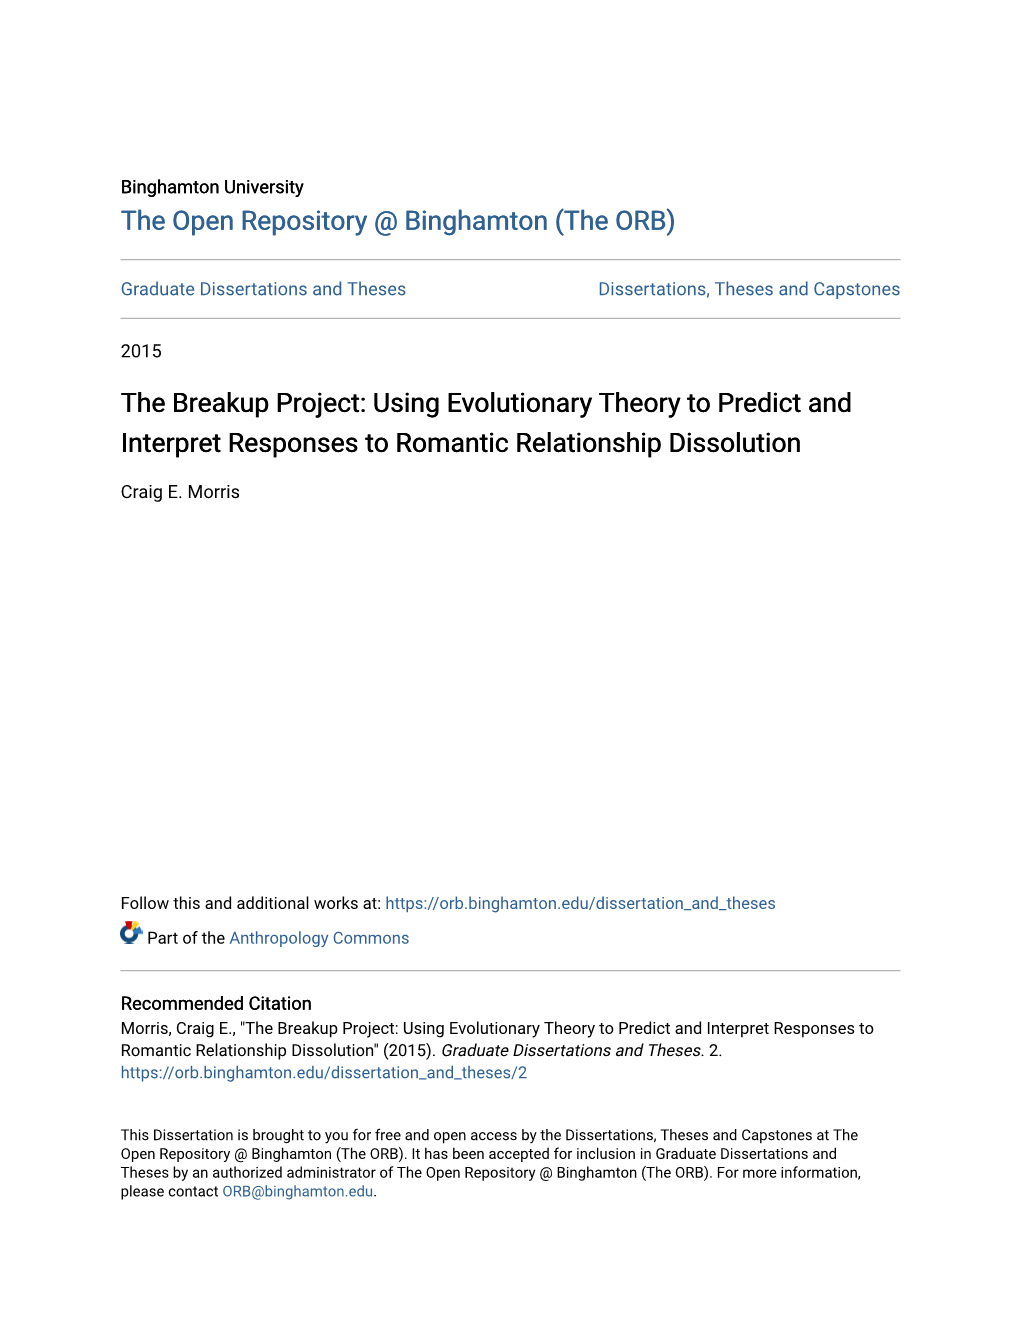 The Breakup Project: Using Evolutionary Theory to Predict and Interpret Responses to Romantic Relationship Dissolution